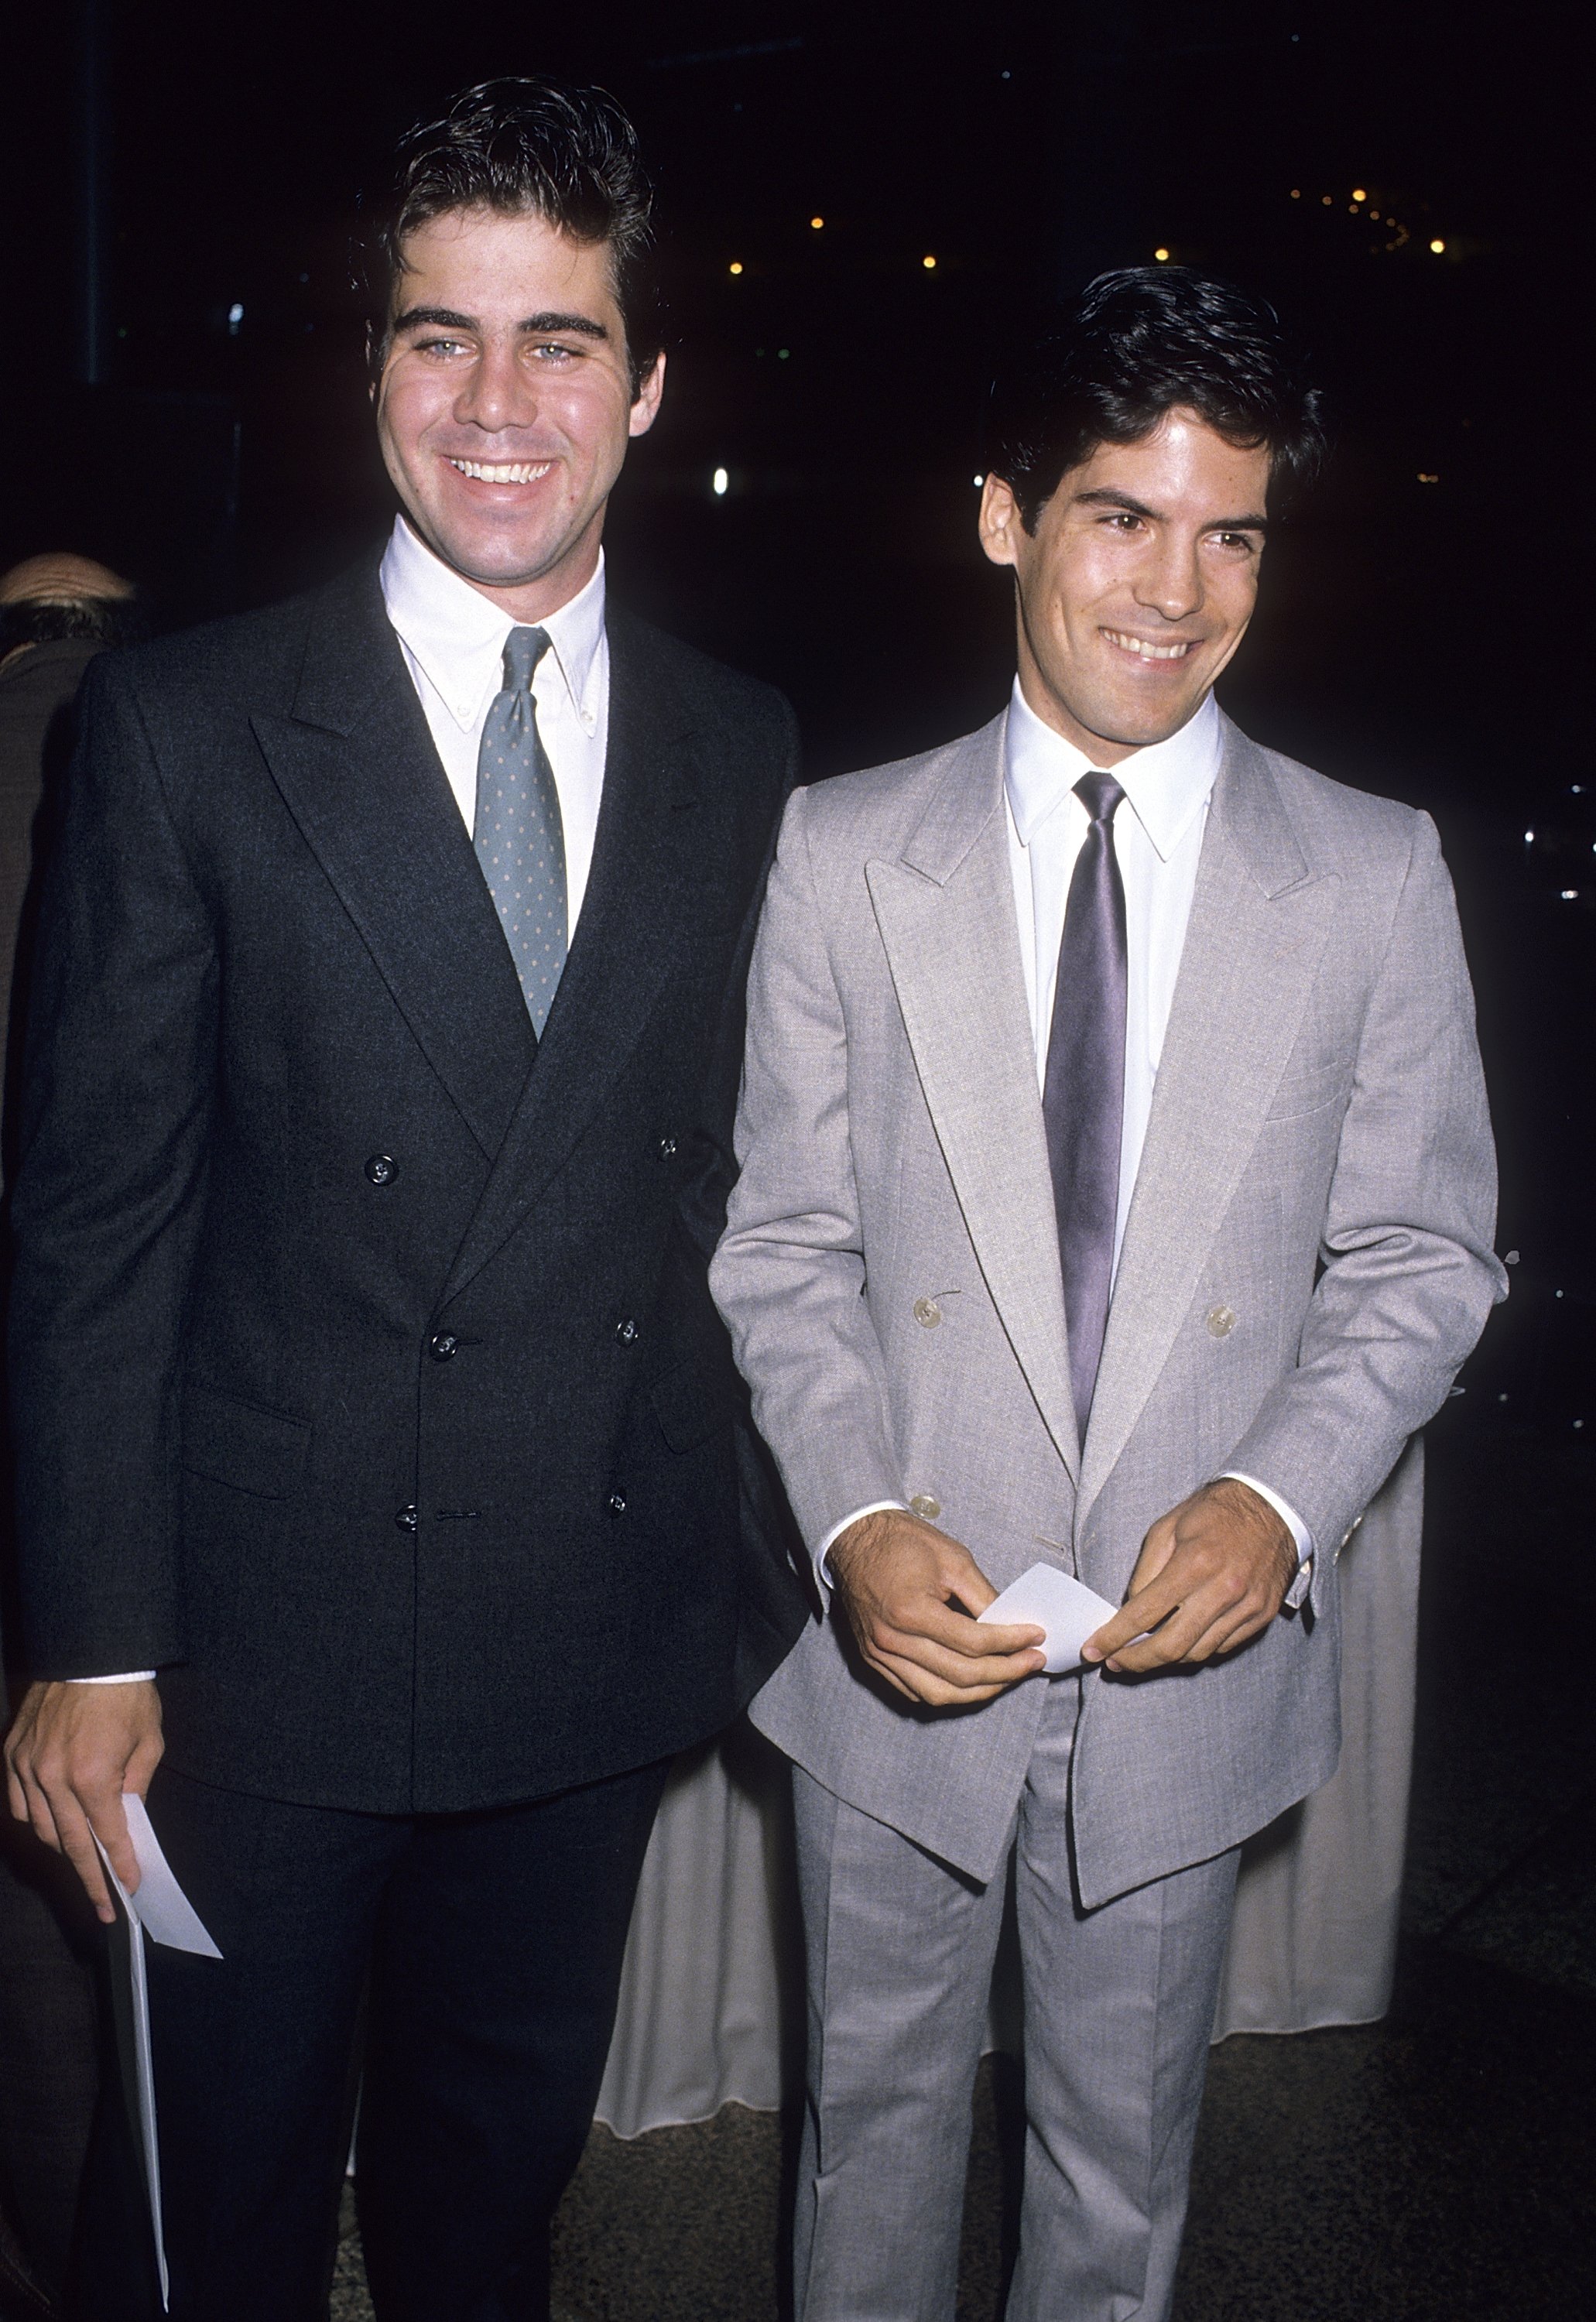 Patrick Labyorteaux and Matthew Labyorteaux at Michael Landon's Second Annual Celebrity Gala on October 15, 1988 | Source: Getty Images